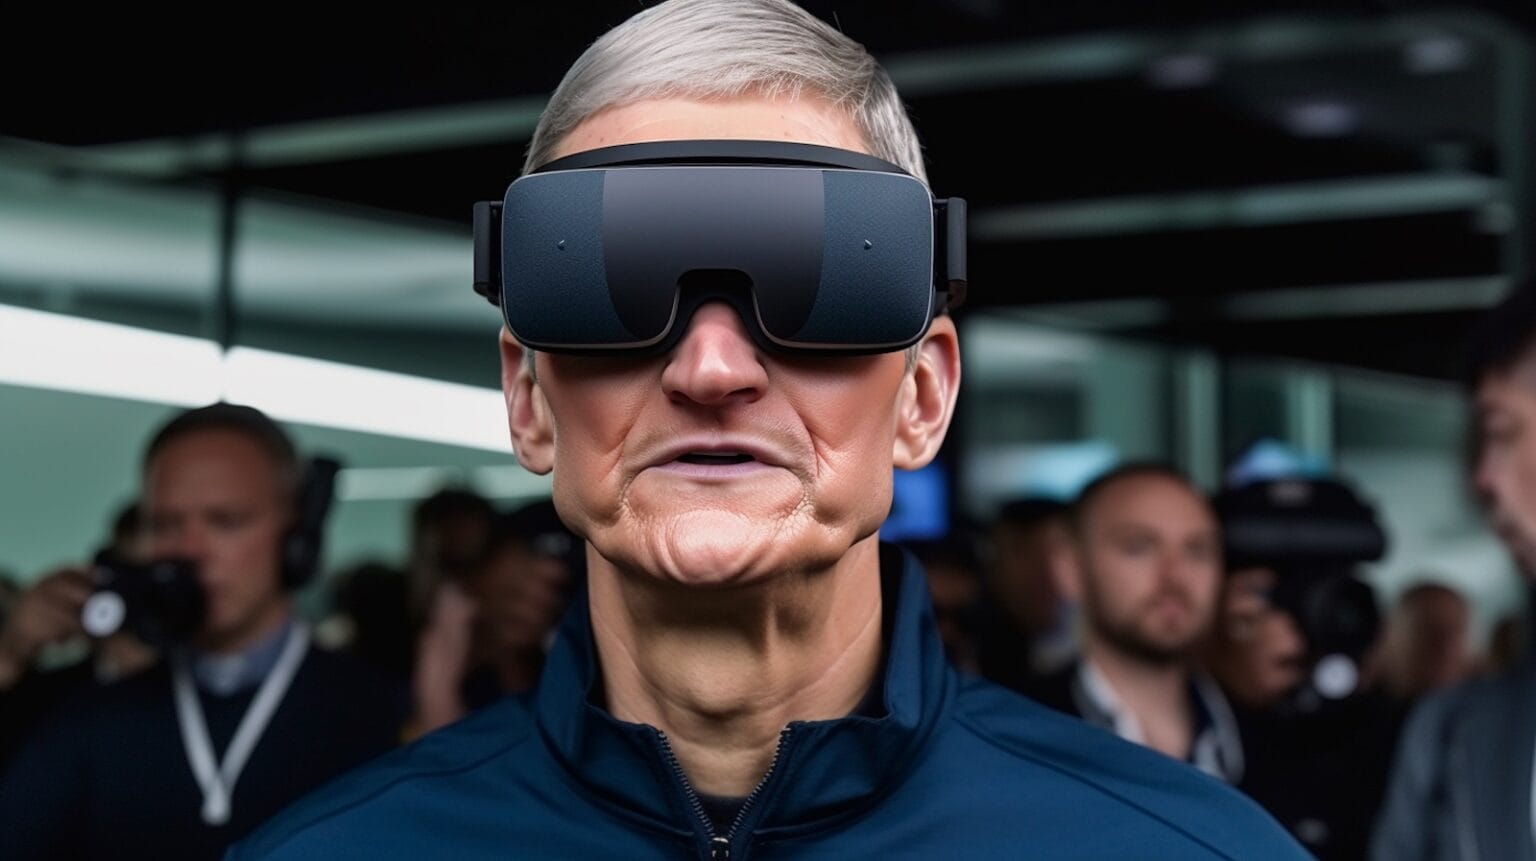 WWDC23 attendees and press can try the new AR/VR headset in a new facility, and demos should continue through the summer.